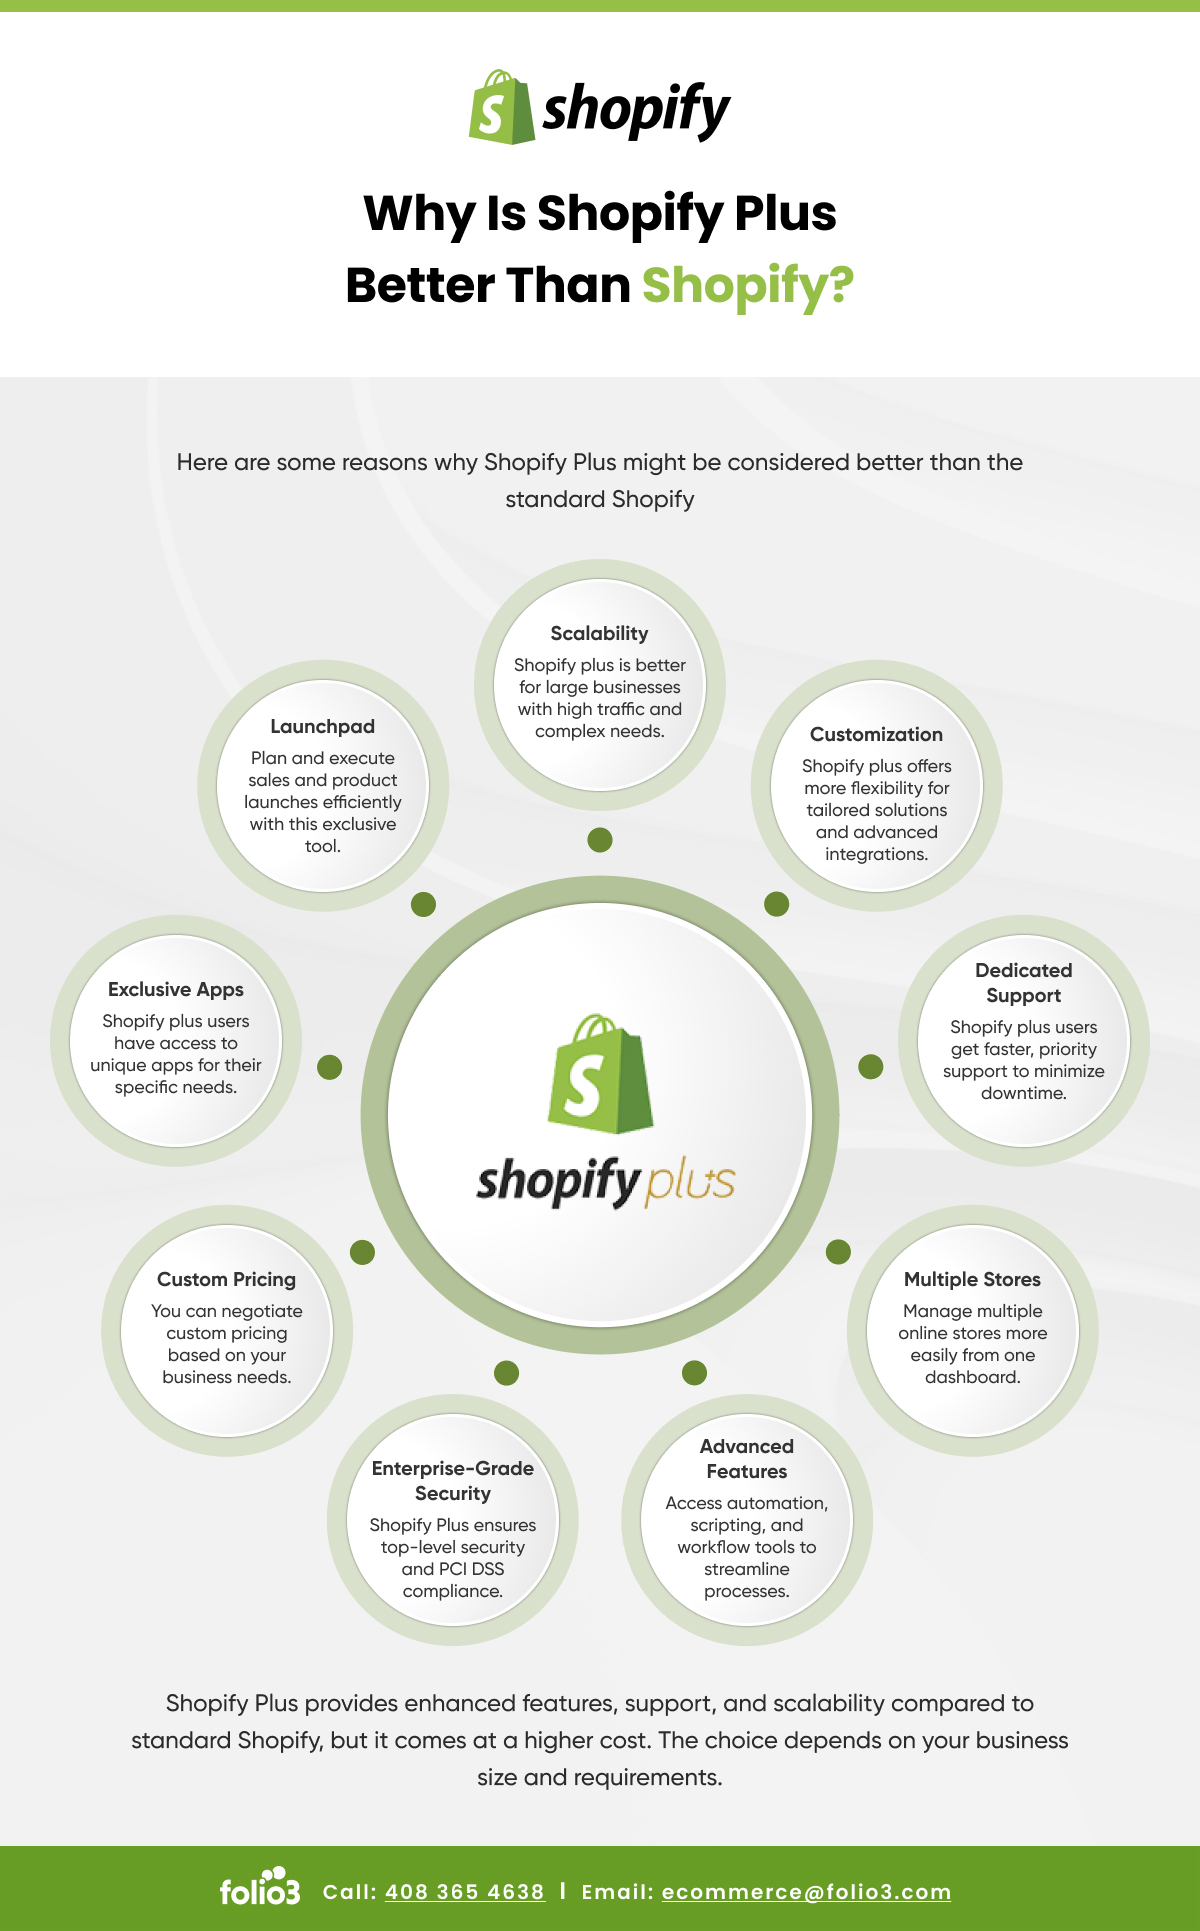 Why is Shopify Plus better than Shopify